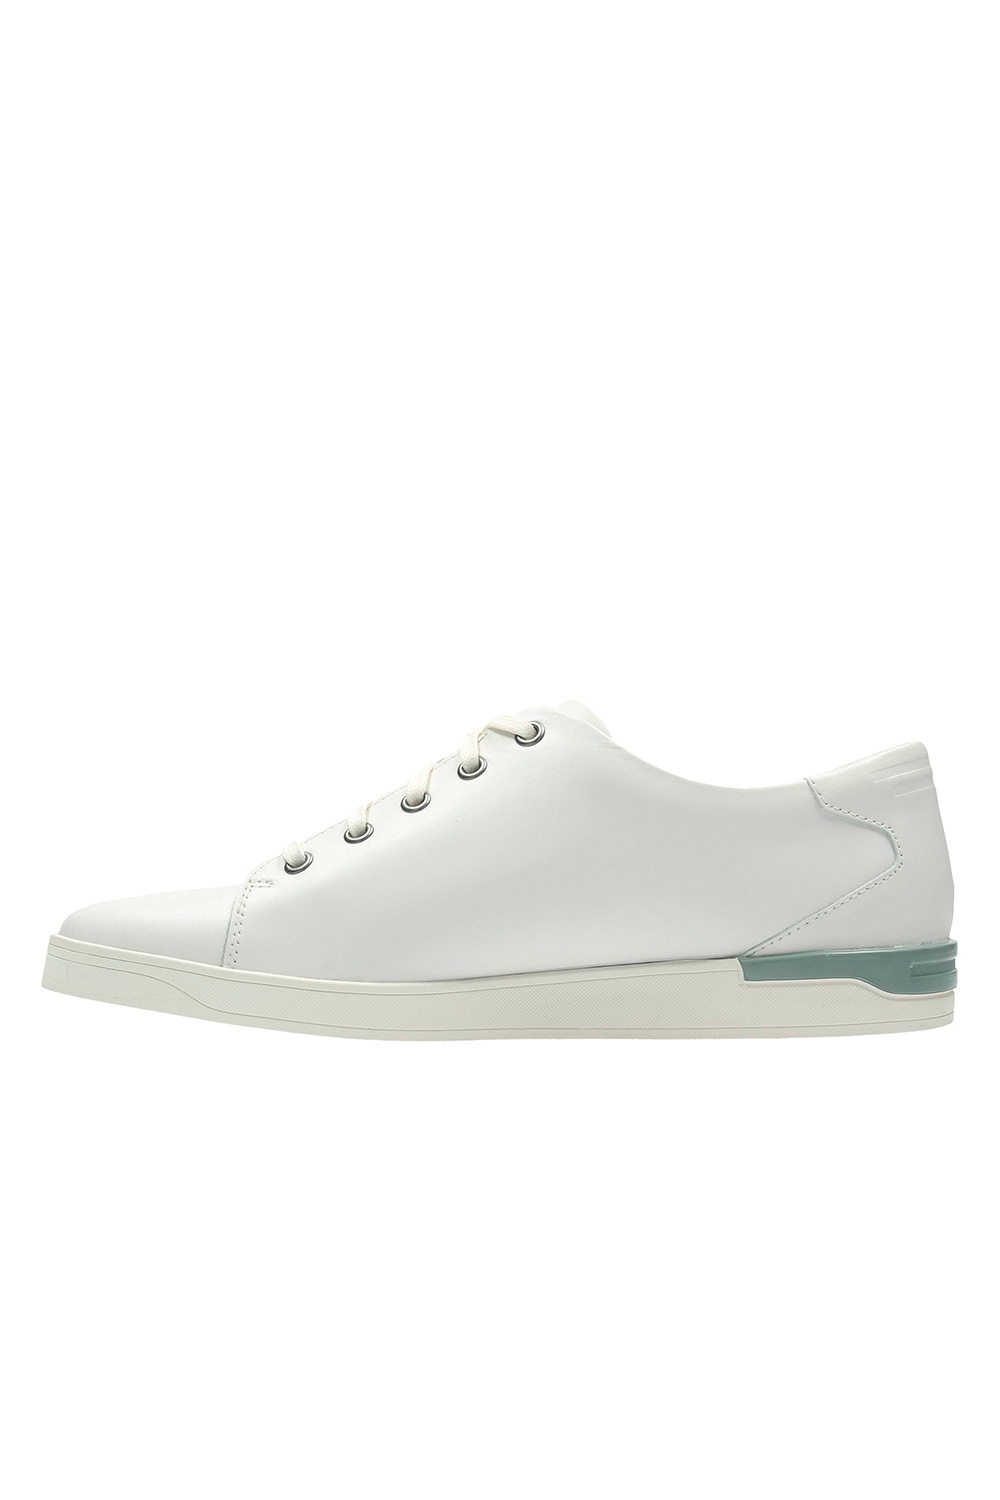 Clarks Mens Stanway Lace White |